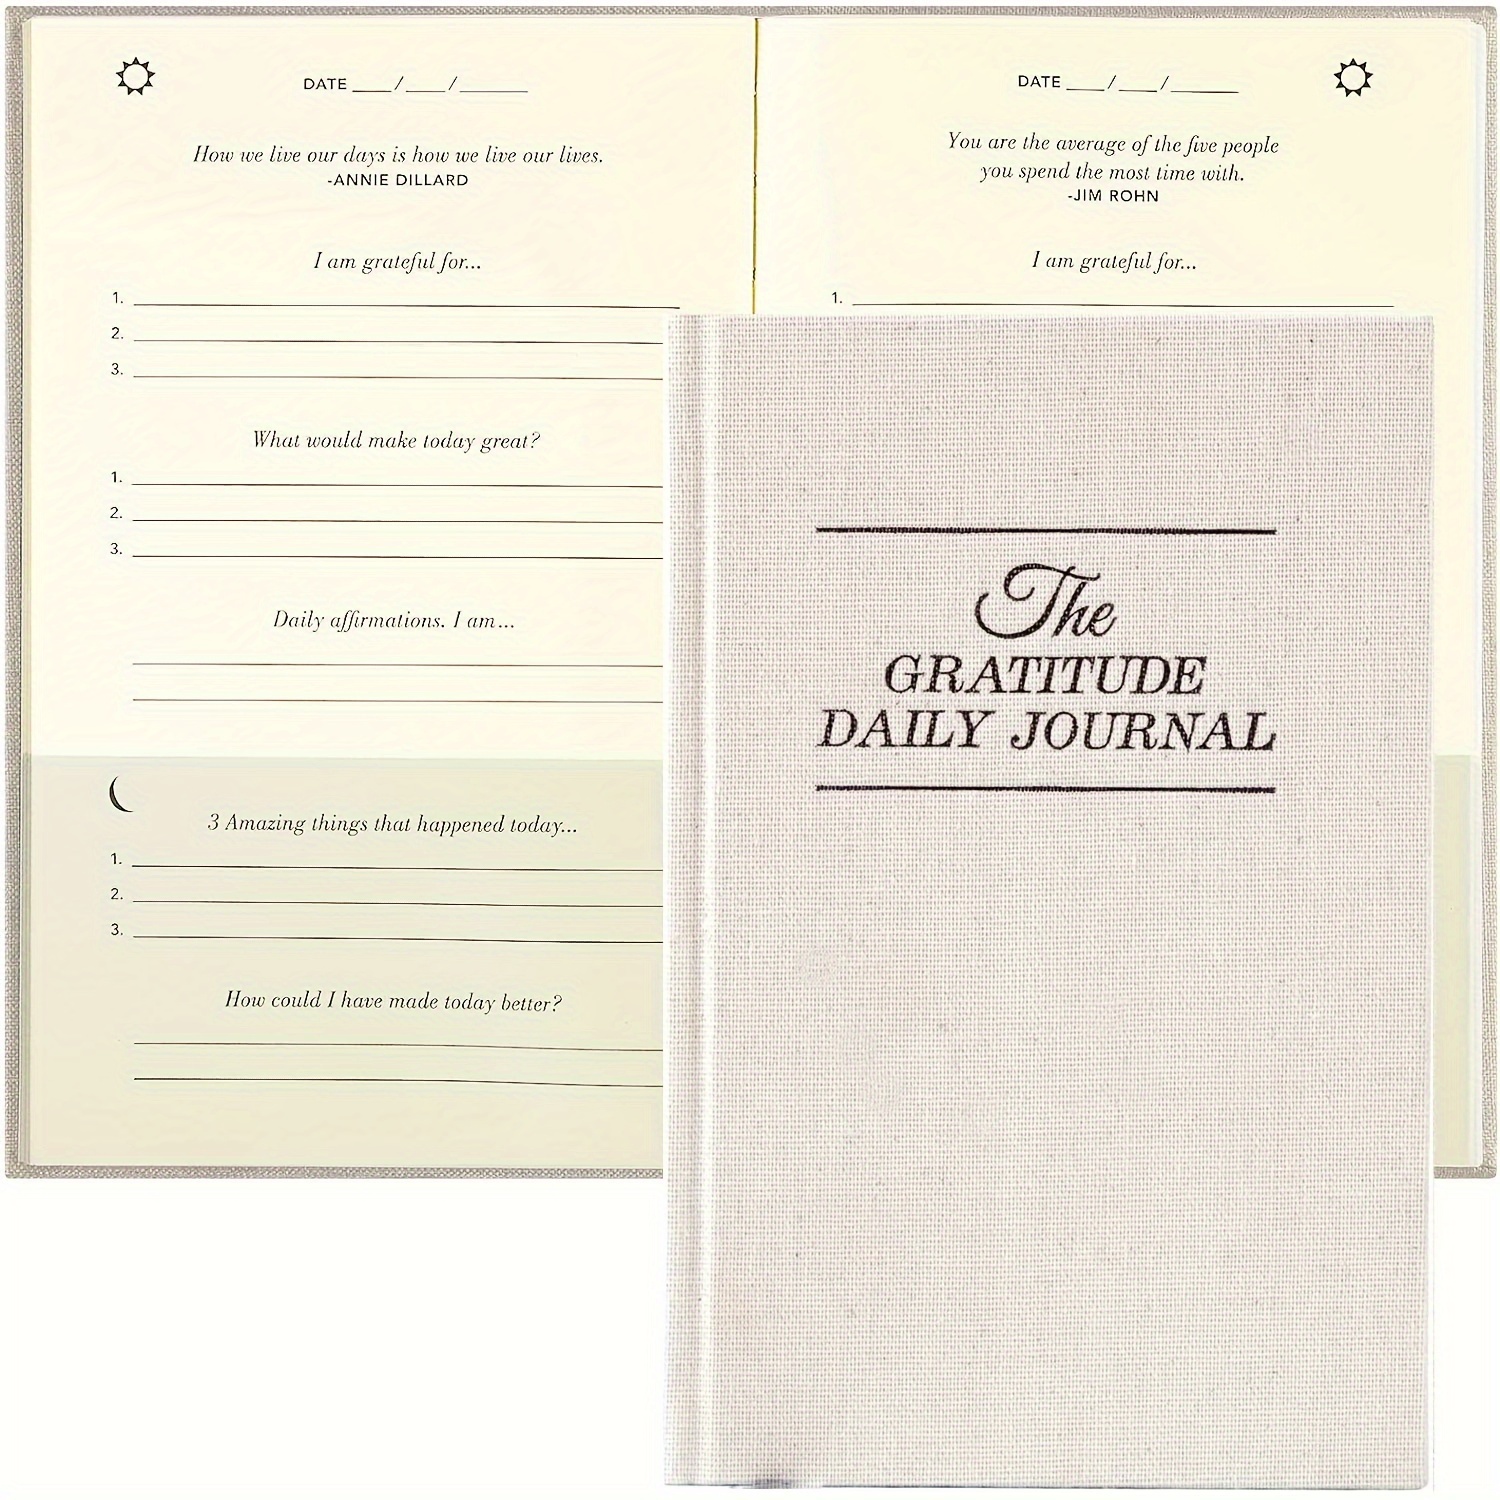 

1pc Adult Gratitude Daily Journal - 5-minute Daily Reflection & Affirmation Guide, Undated Hardcover, Optimism & Positivity Planner For Happiness - English Language